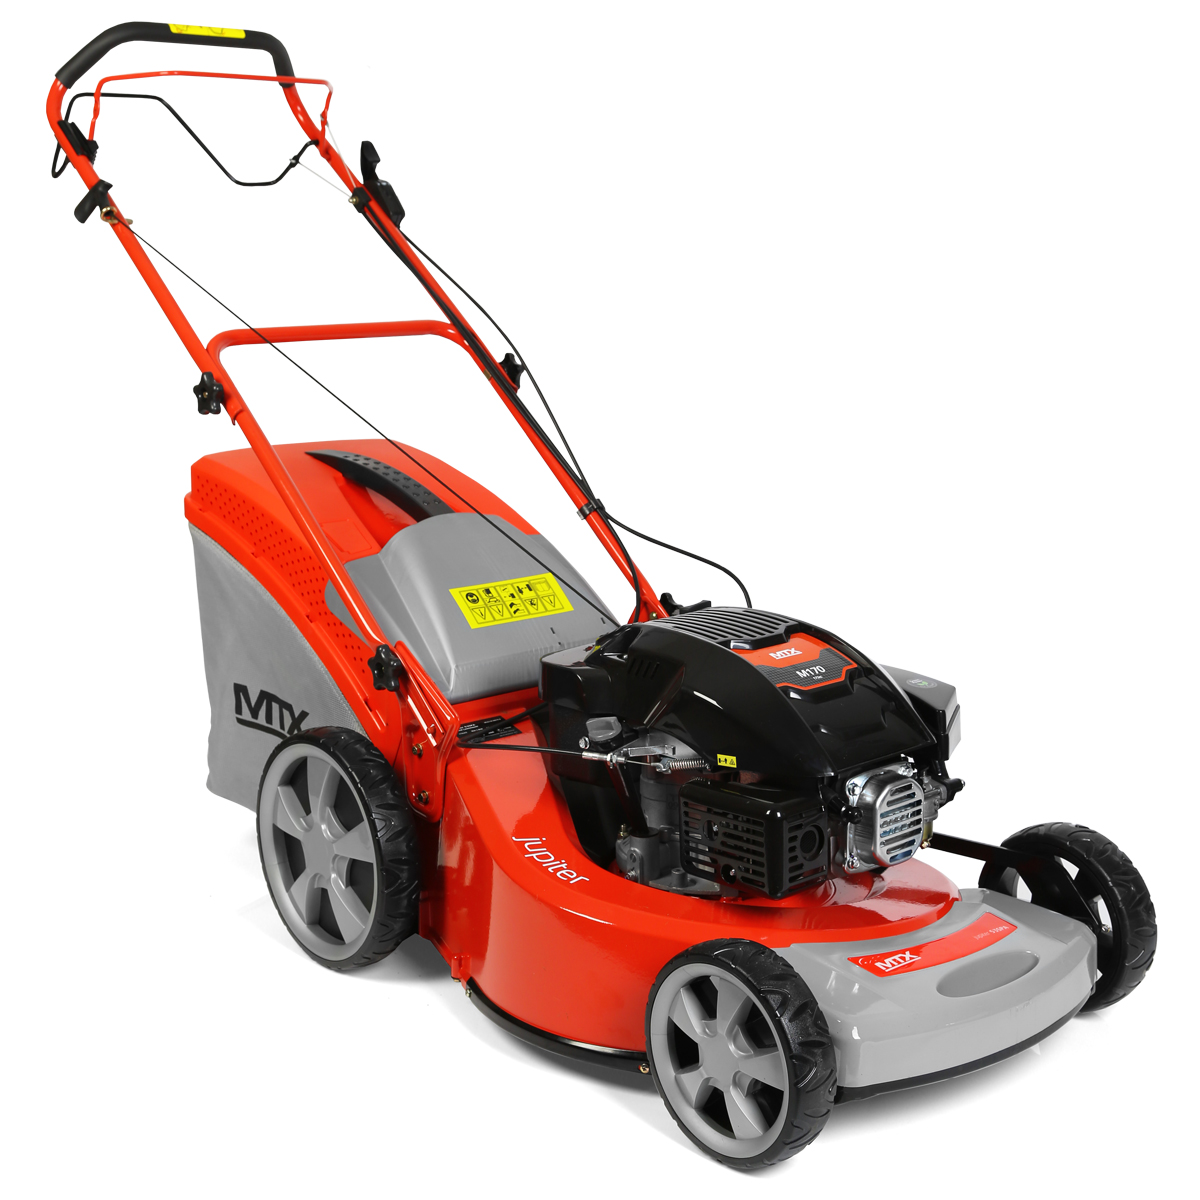 MTX Jupiter 53SPA Self Propelled Petrol Lawnmower with Alloy Deck Exclusive Special Offer